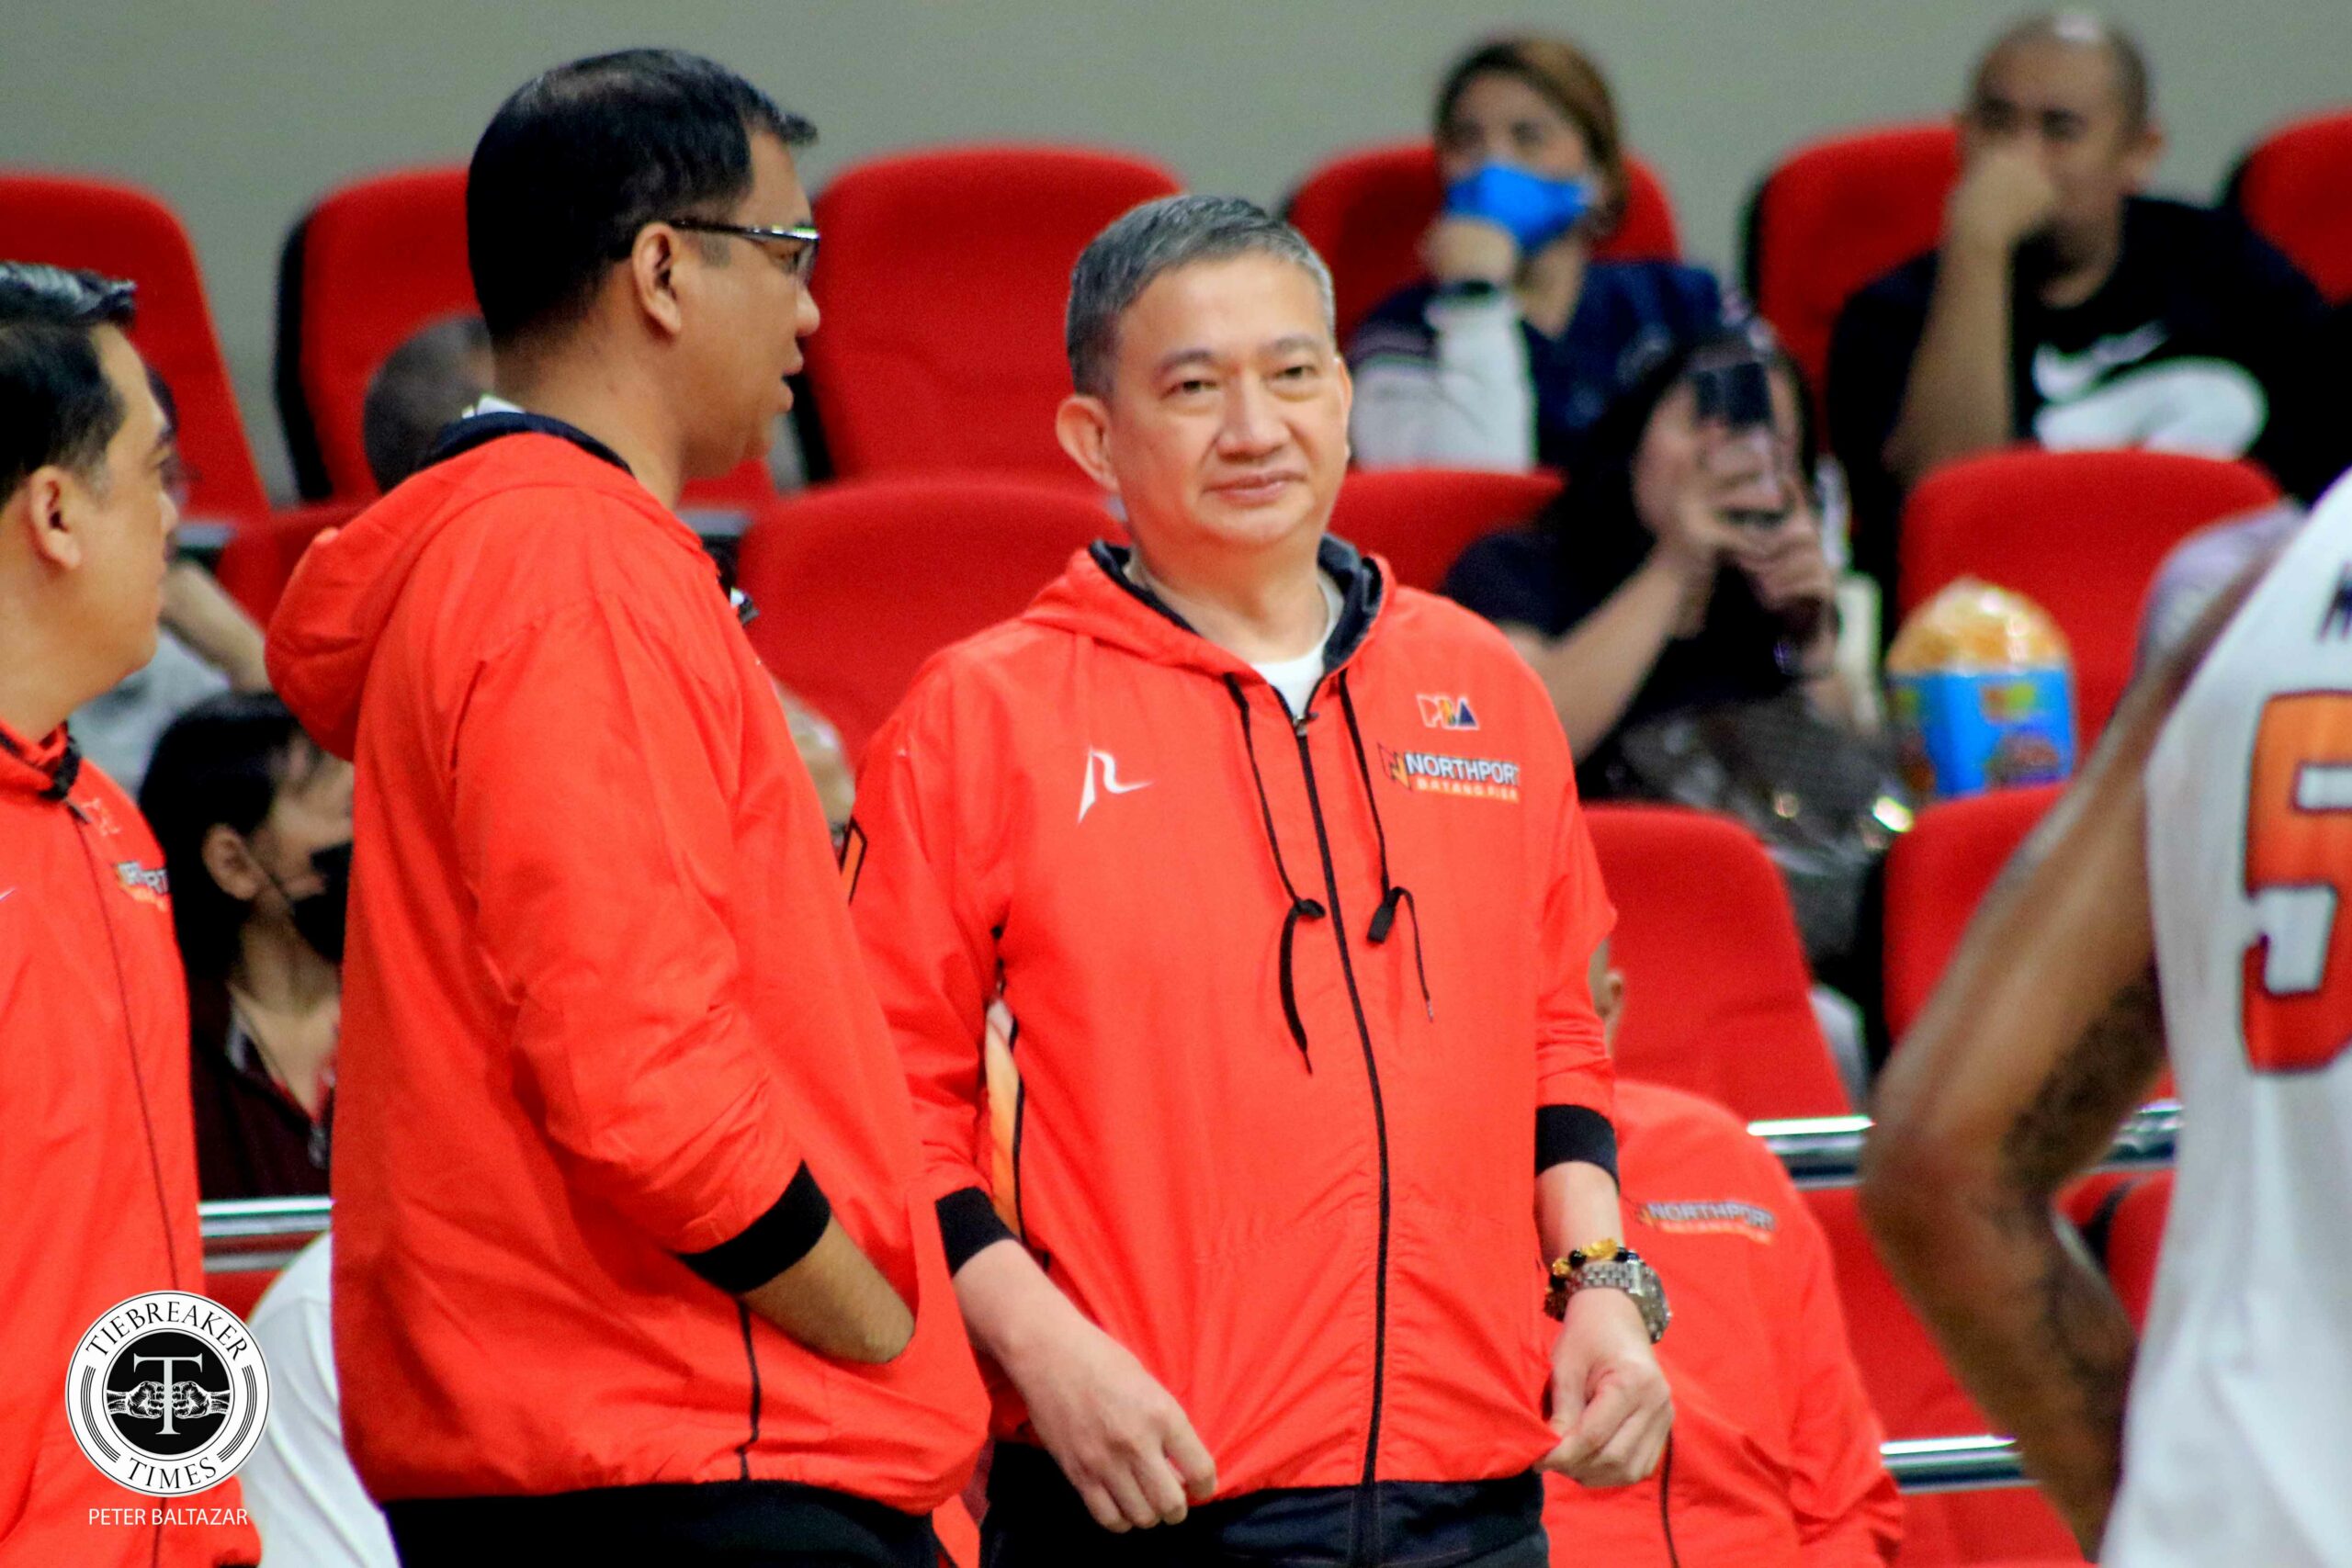 2023-PBA-Governors-Cup-Meralco-vs-Northport-Bonnie-Tan-scaled Bonnie Tan hopes Northport recovers as debut ends up in disaster Basketball News PBA  - philippine sports news